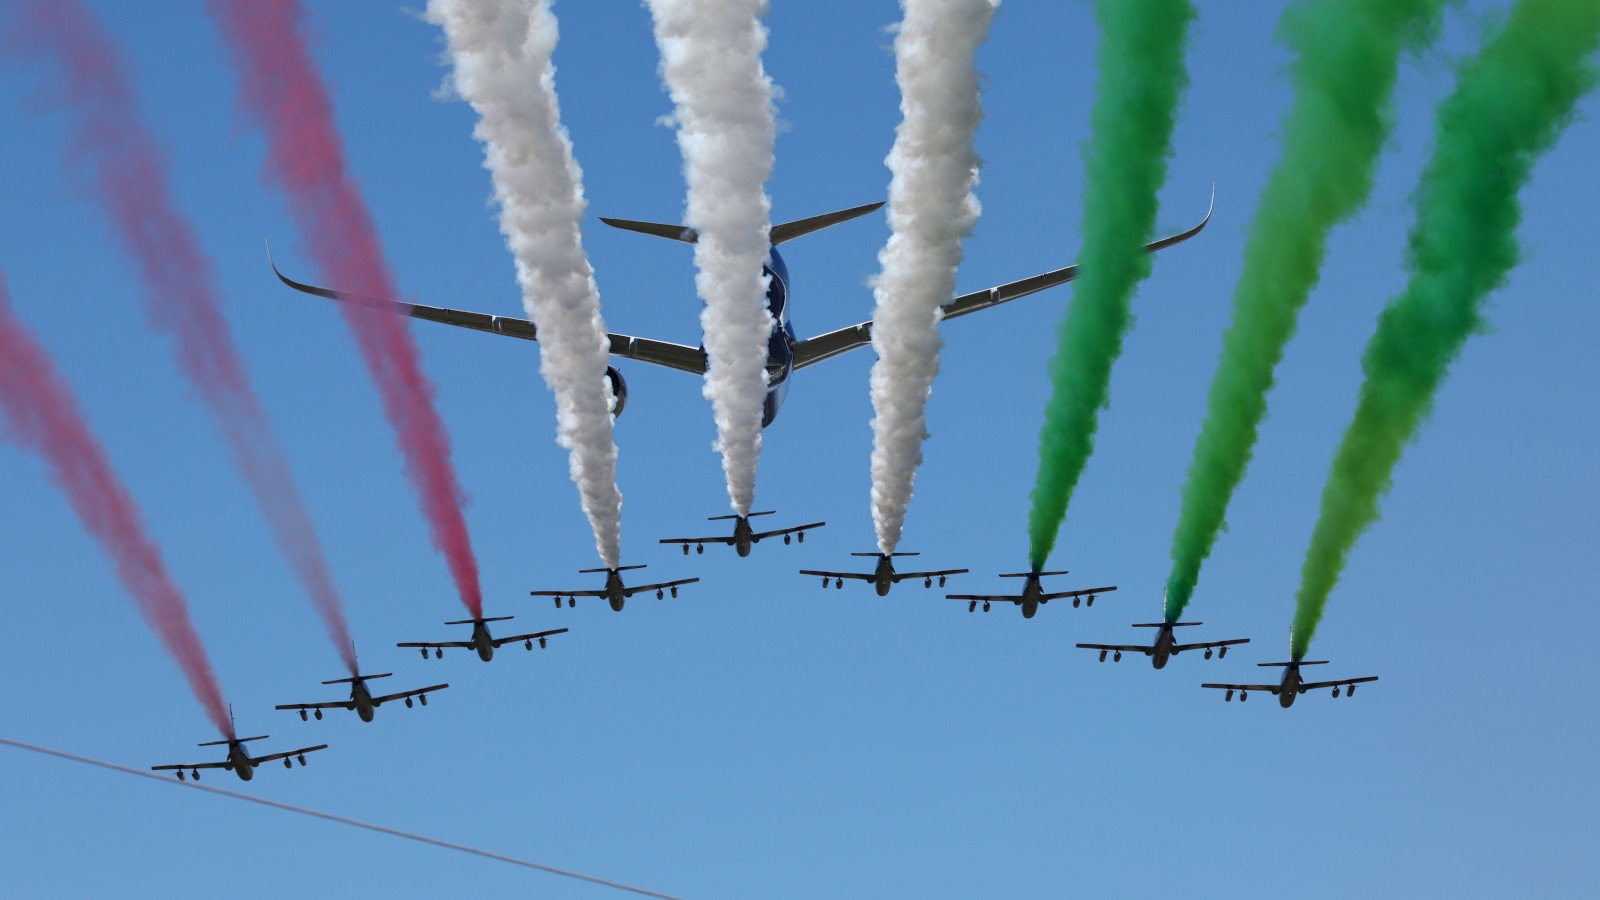 A flypast at Monza including a military plane and nine jets. Italy September 2022